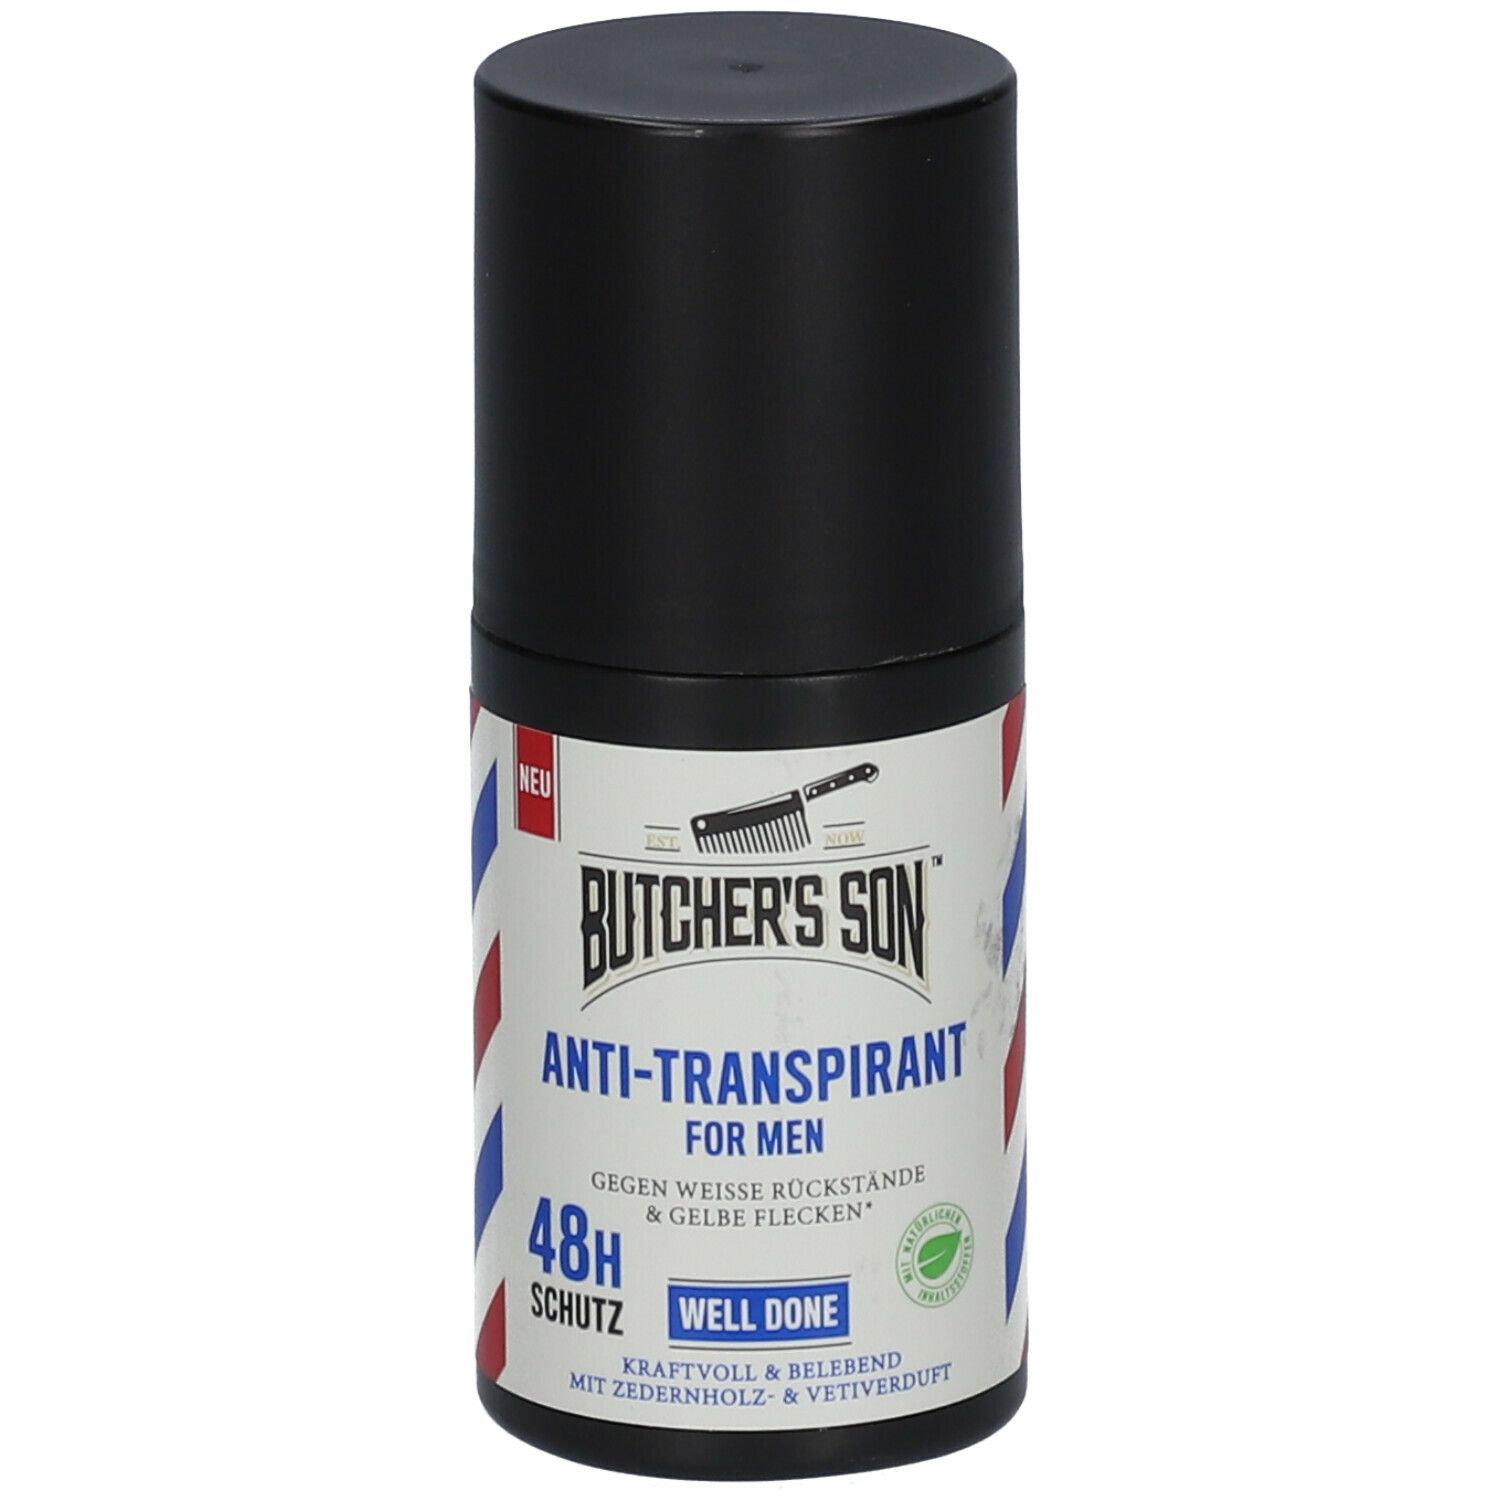 BUTCHERS SON ANTI-TRANSPIRANT FOR MEN WELL DONE